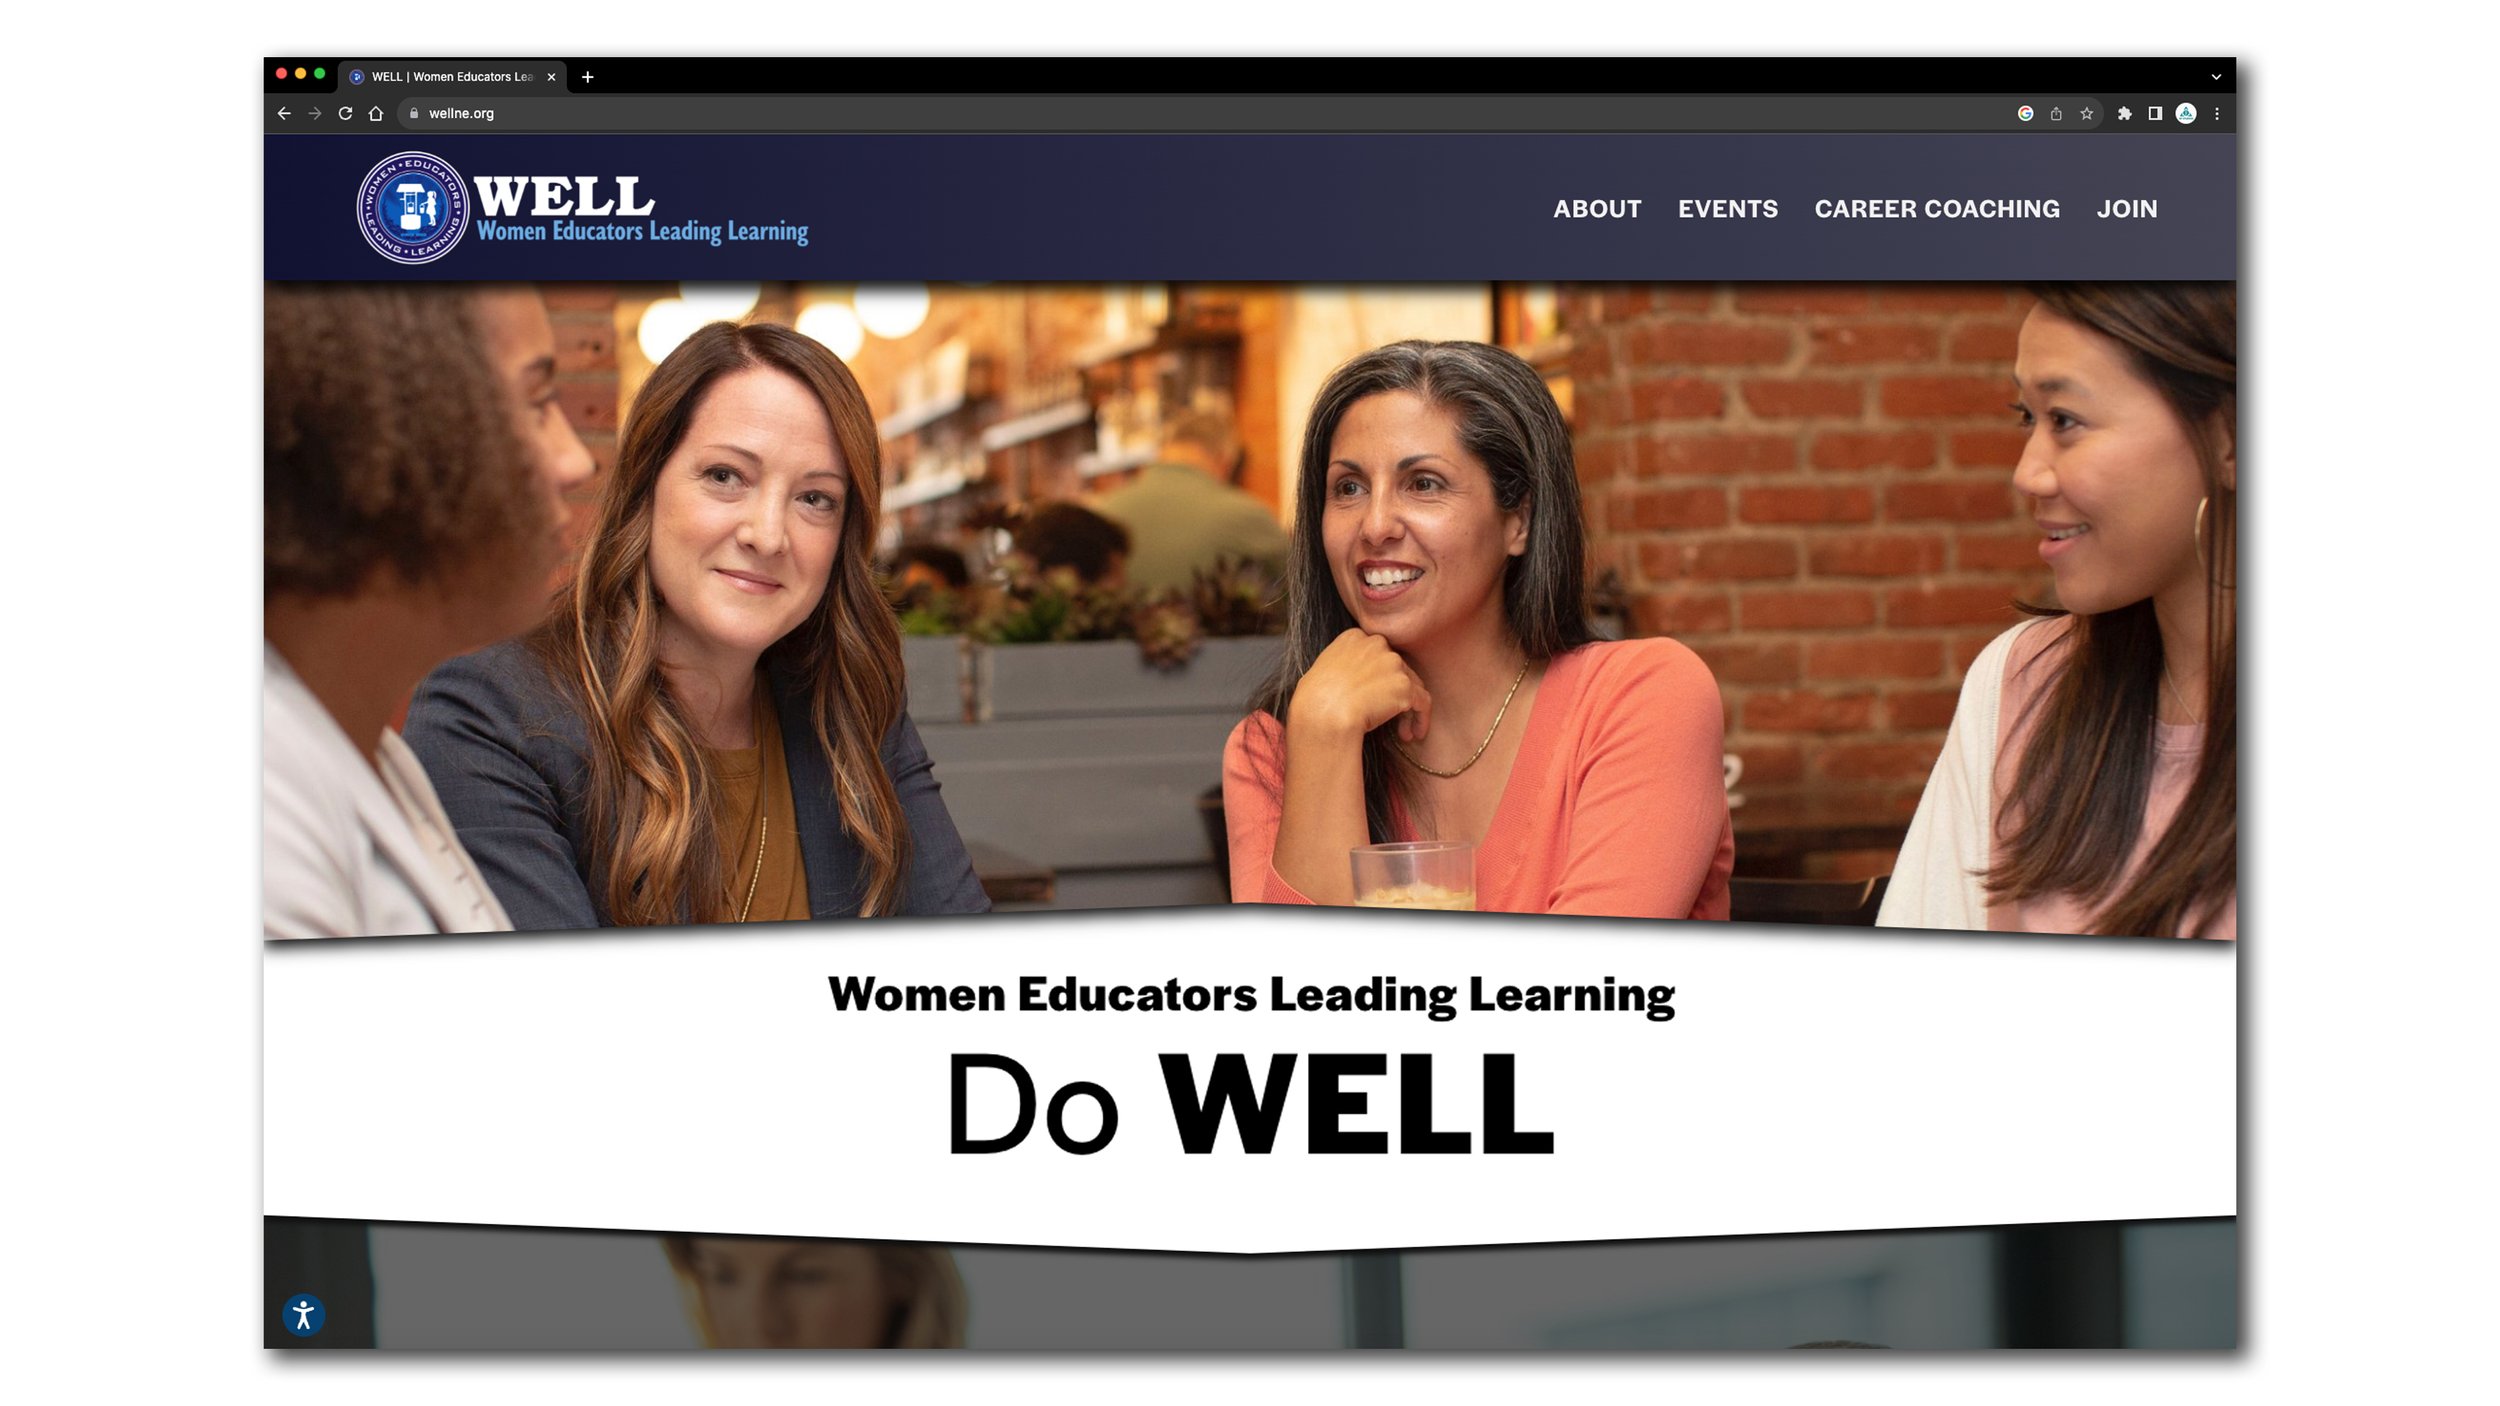 Website Design and Production - Online -- designed and illustrated by SP STUDIOS, for WELL - Women Educators Leading Learning, New England.